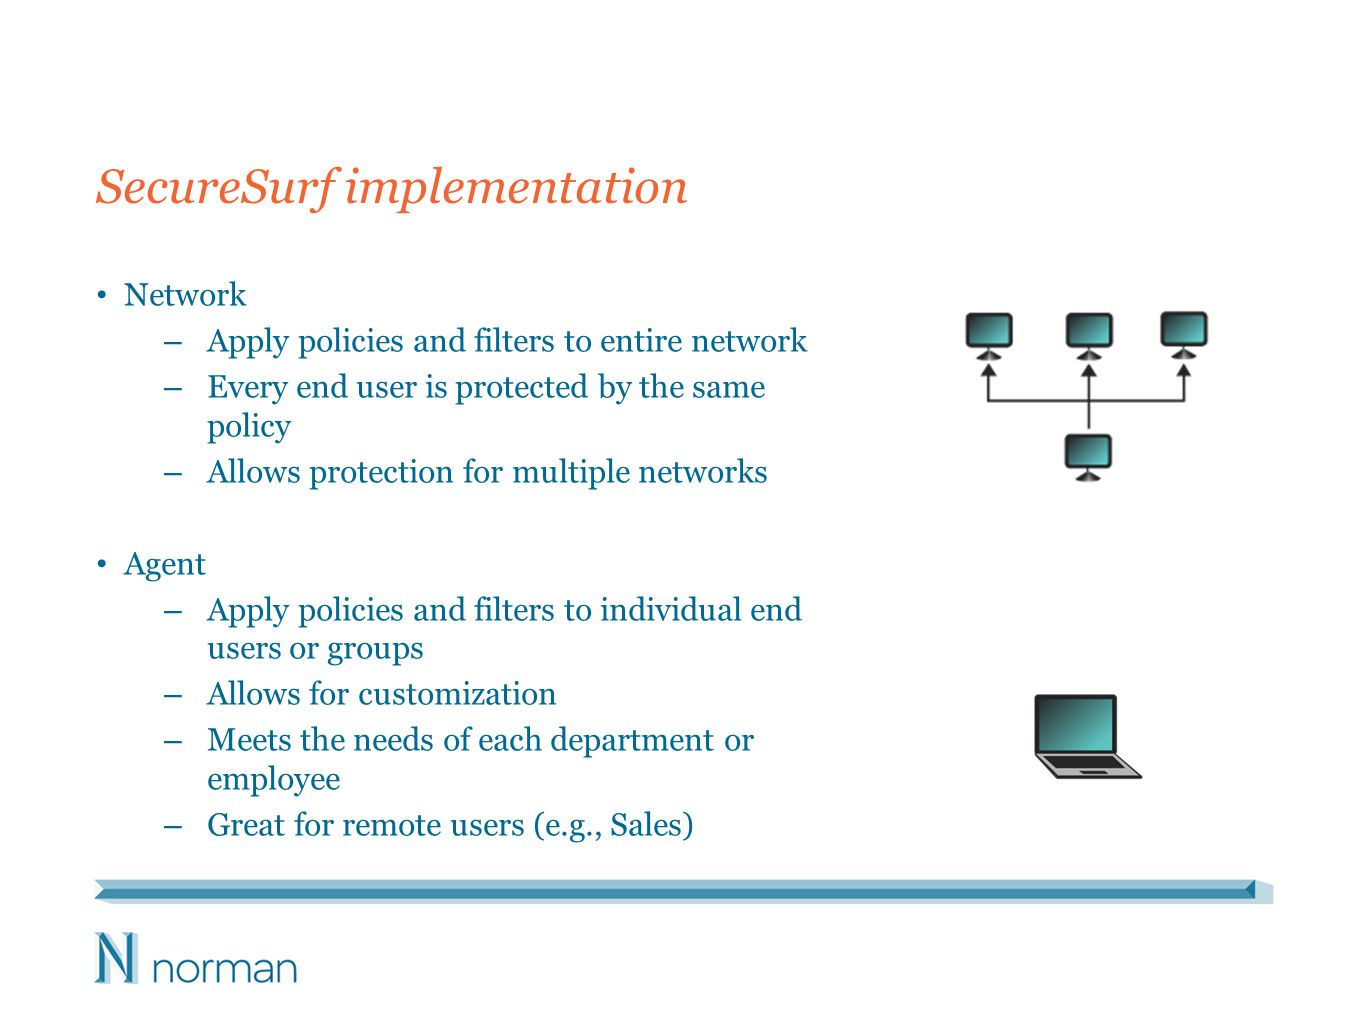 SecureSurf implementation Network – Apply policies and filters to entire network – Every end user is protected by the same policy – Allows protection for multiple networks Agent – Apply policies and filters to individual end users or groups – Allows for customization – Meets the needs of each department or employee – Great for remote users (e.g., Sales)